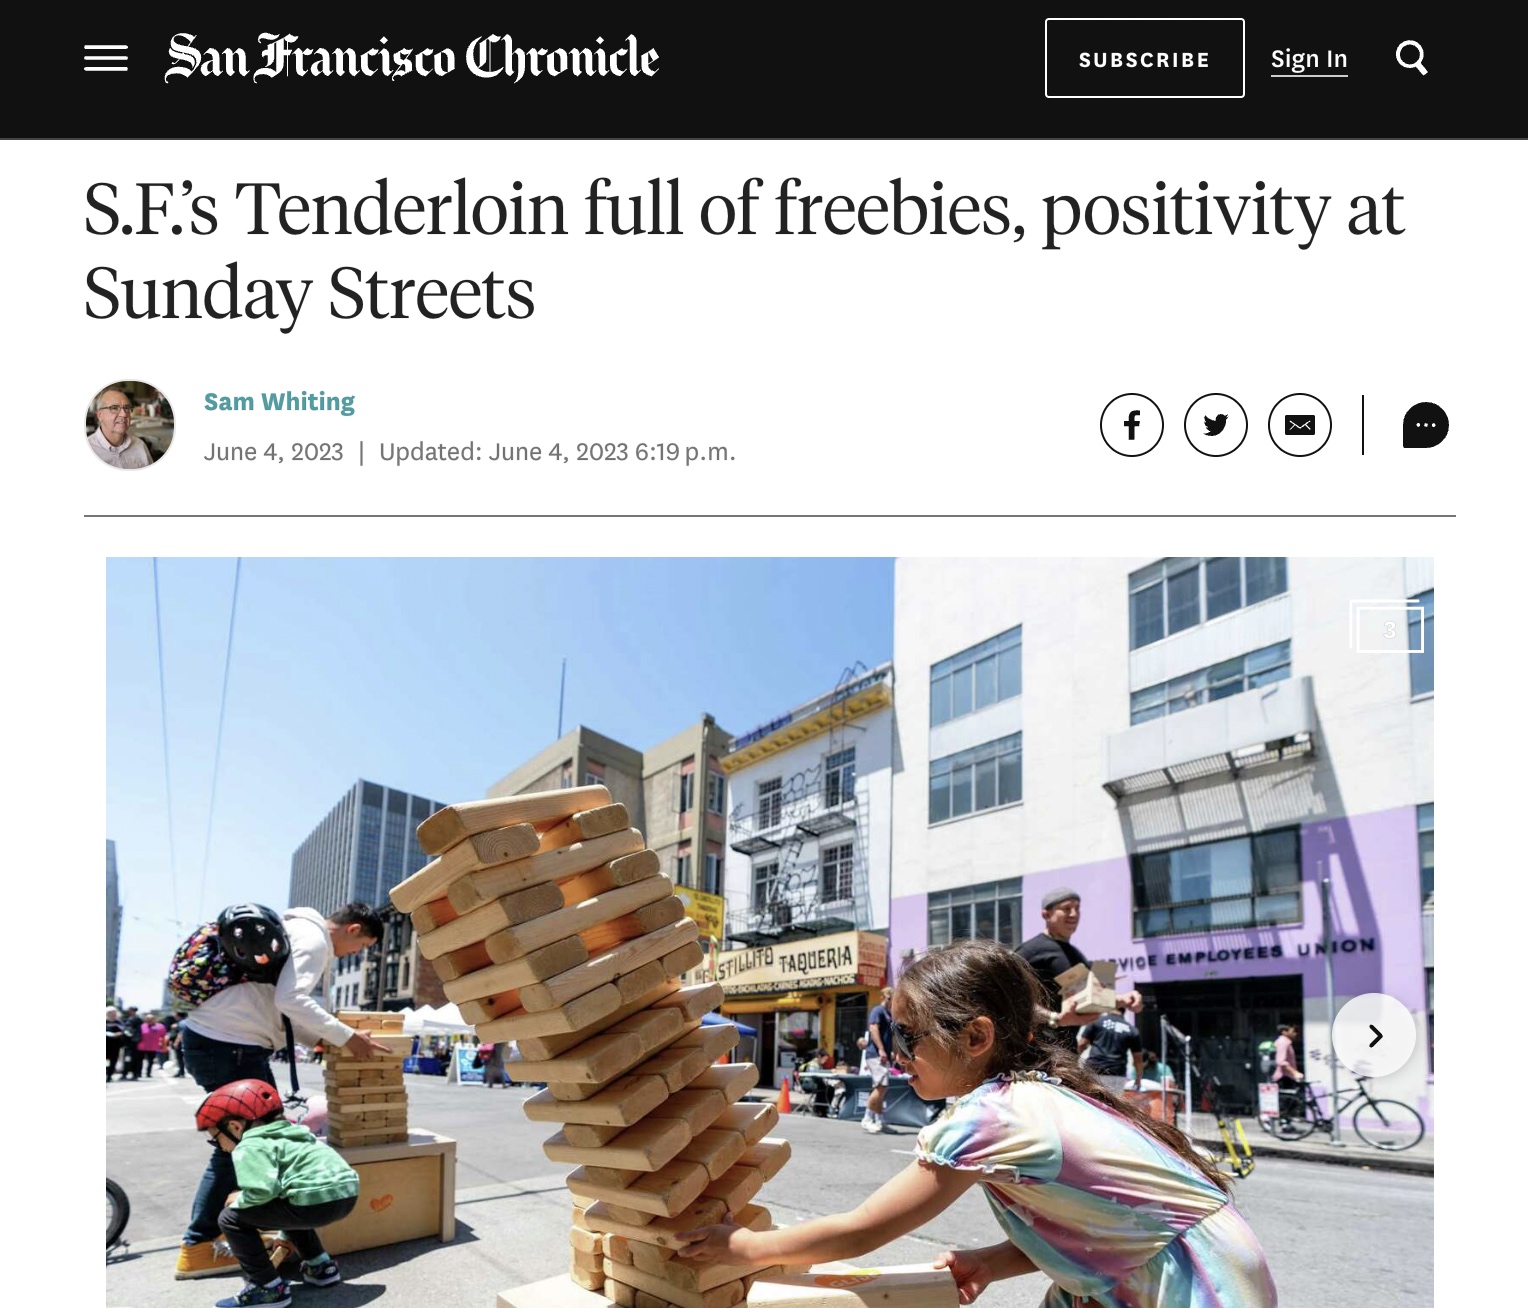 SF Chronicle: S.F.’s Tenderloin full of freebies, positivity at Sunday Streets